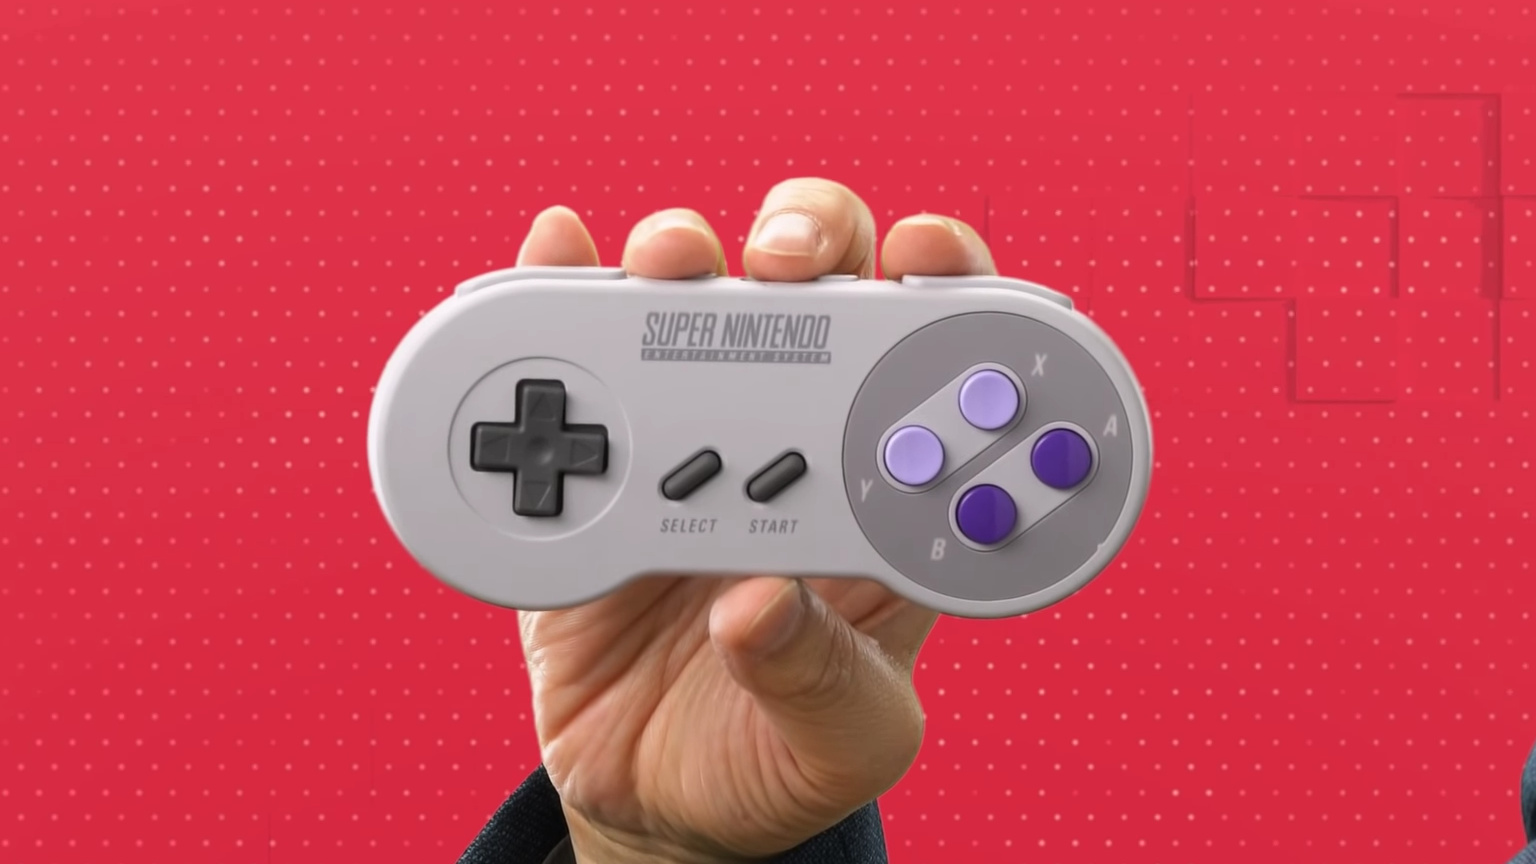 snes games added to switch